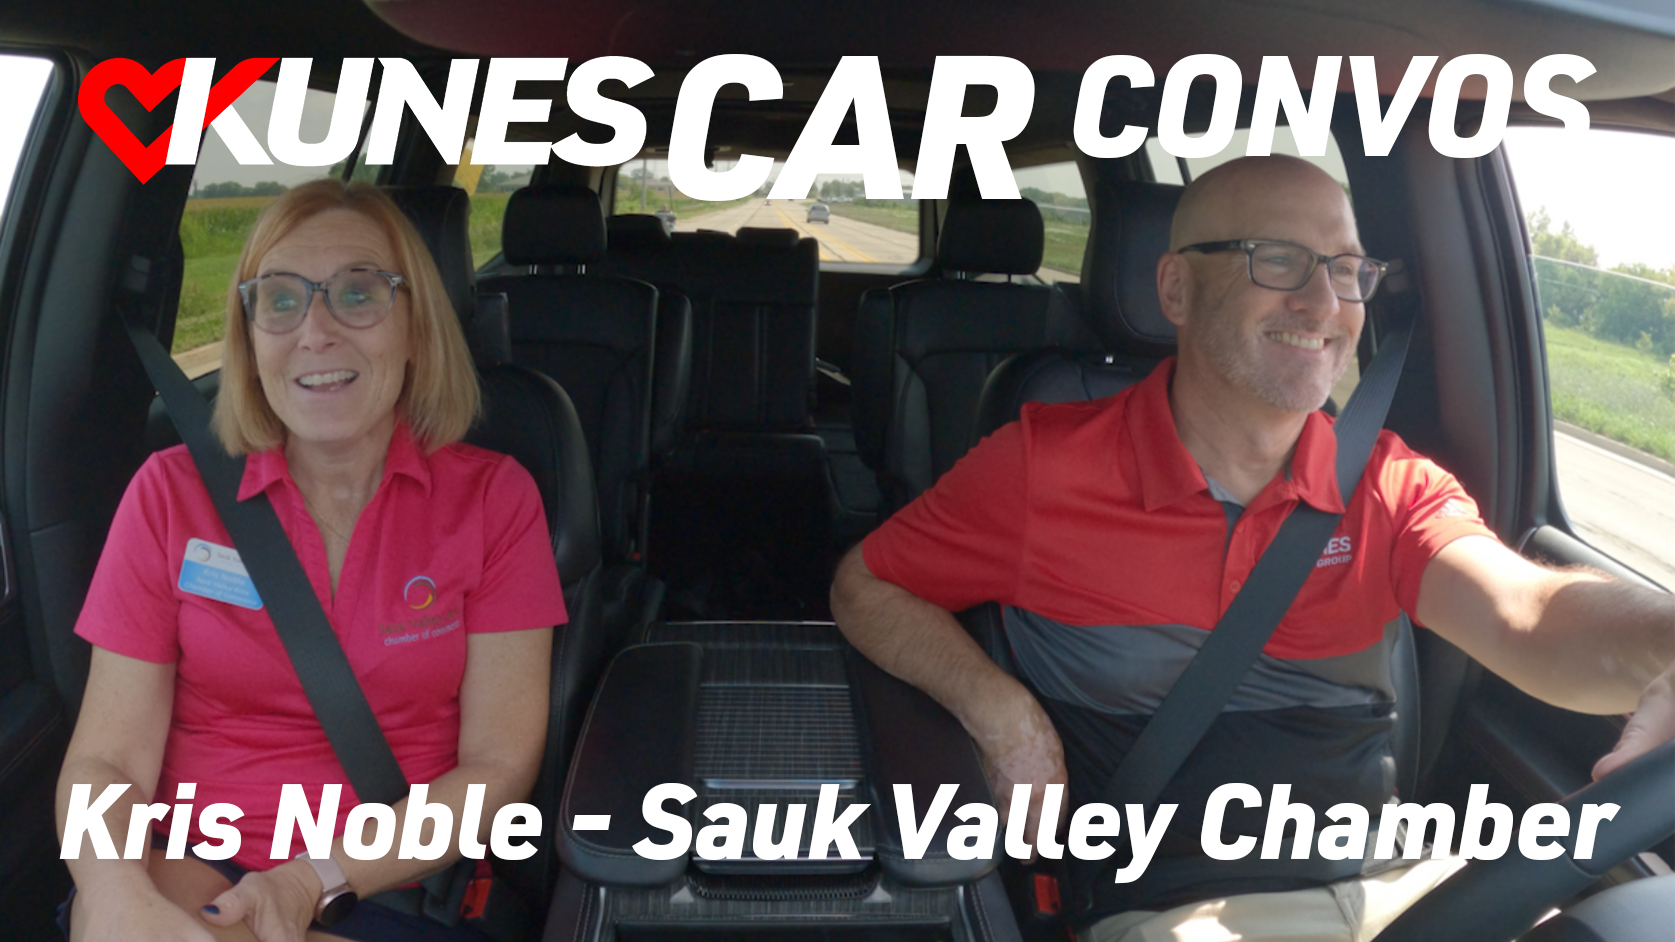 Pictured left to right: Kris Noble, Executive Director of Sauk Valley Area Chamber of Commerce, and Tony Wheatley, Regional Manager of Kunes Auto Group Sauk Valley; Text reads: Kunes Car Convos; Kris Noble - Sauk Valley Chamber